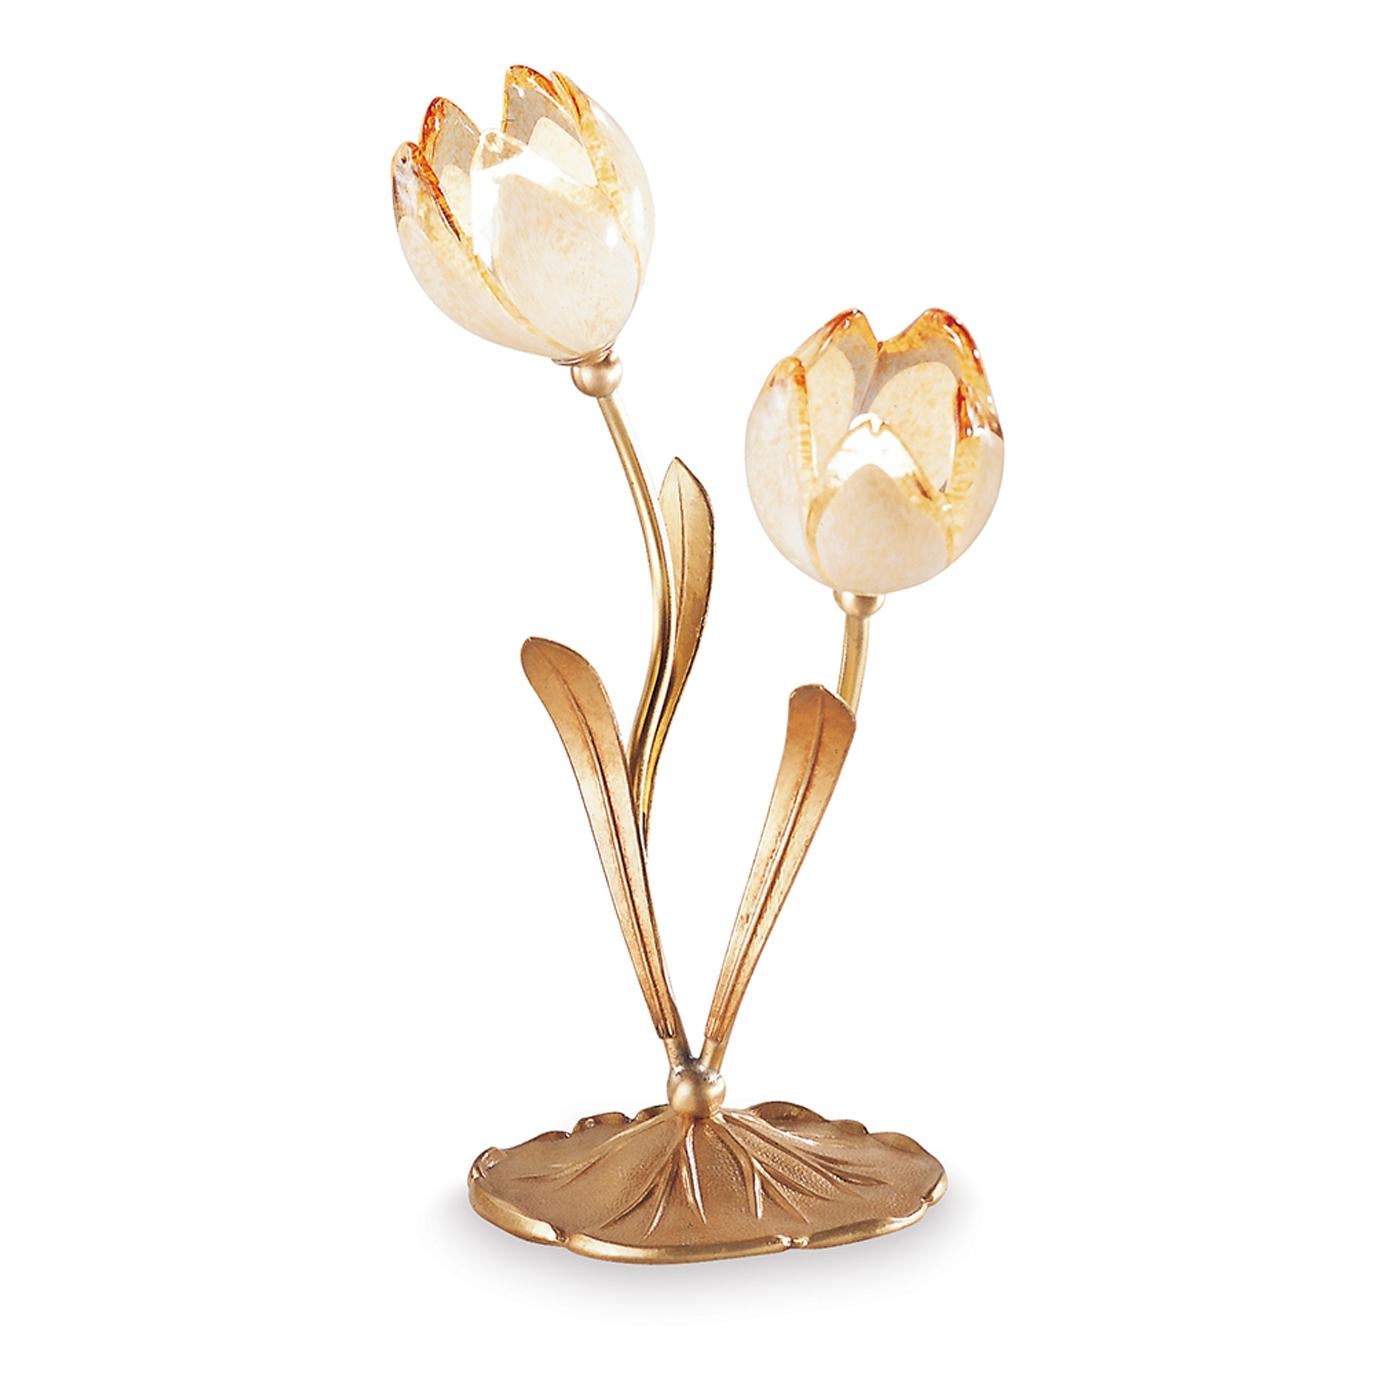 Romantic in its silhouette, recreating a couple of tulips in bloom, this table lamp is an ode to nature enhanced by the luxury of precious finishes and materials. The leafed stems sinuously extend from the textured scalloped base up to bud-shaped